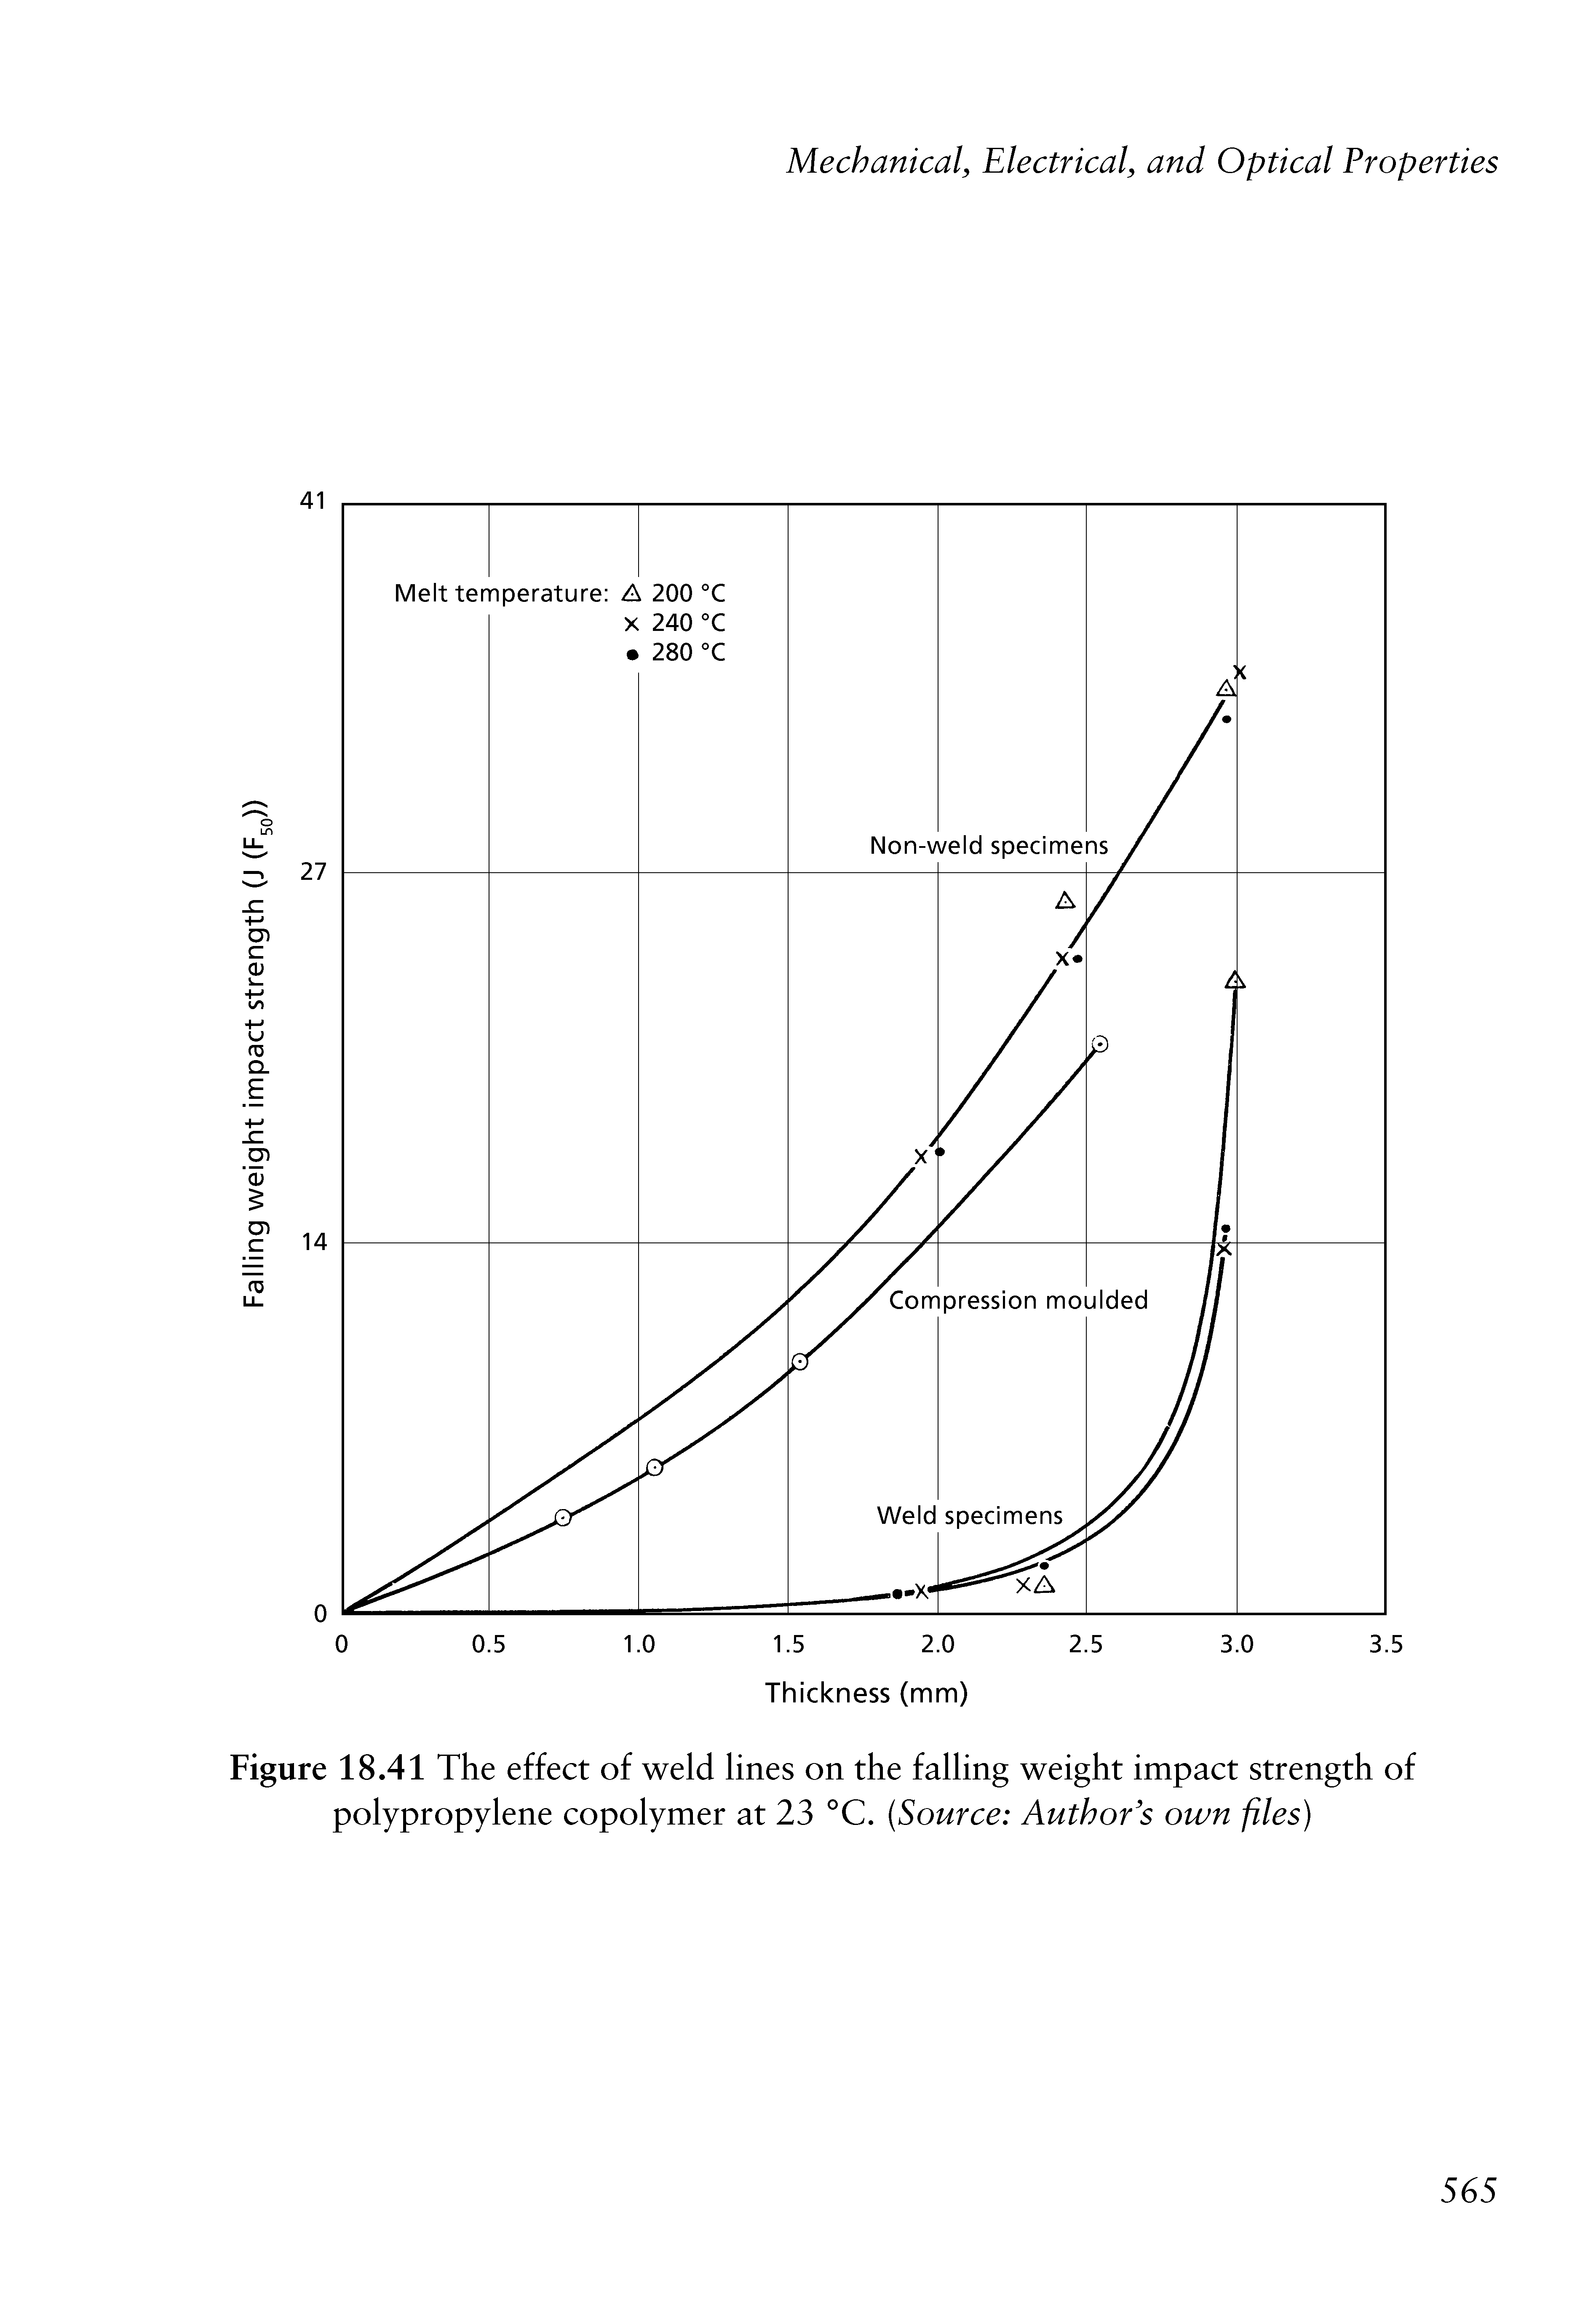 Figure 18.41 The effect of weld lines on the falling weight impact strength of polypropylene copolymer at 23 °C. Source Author s own files)...